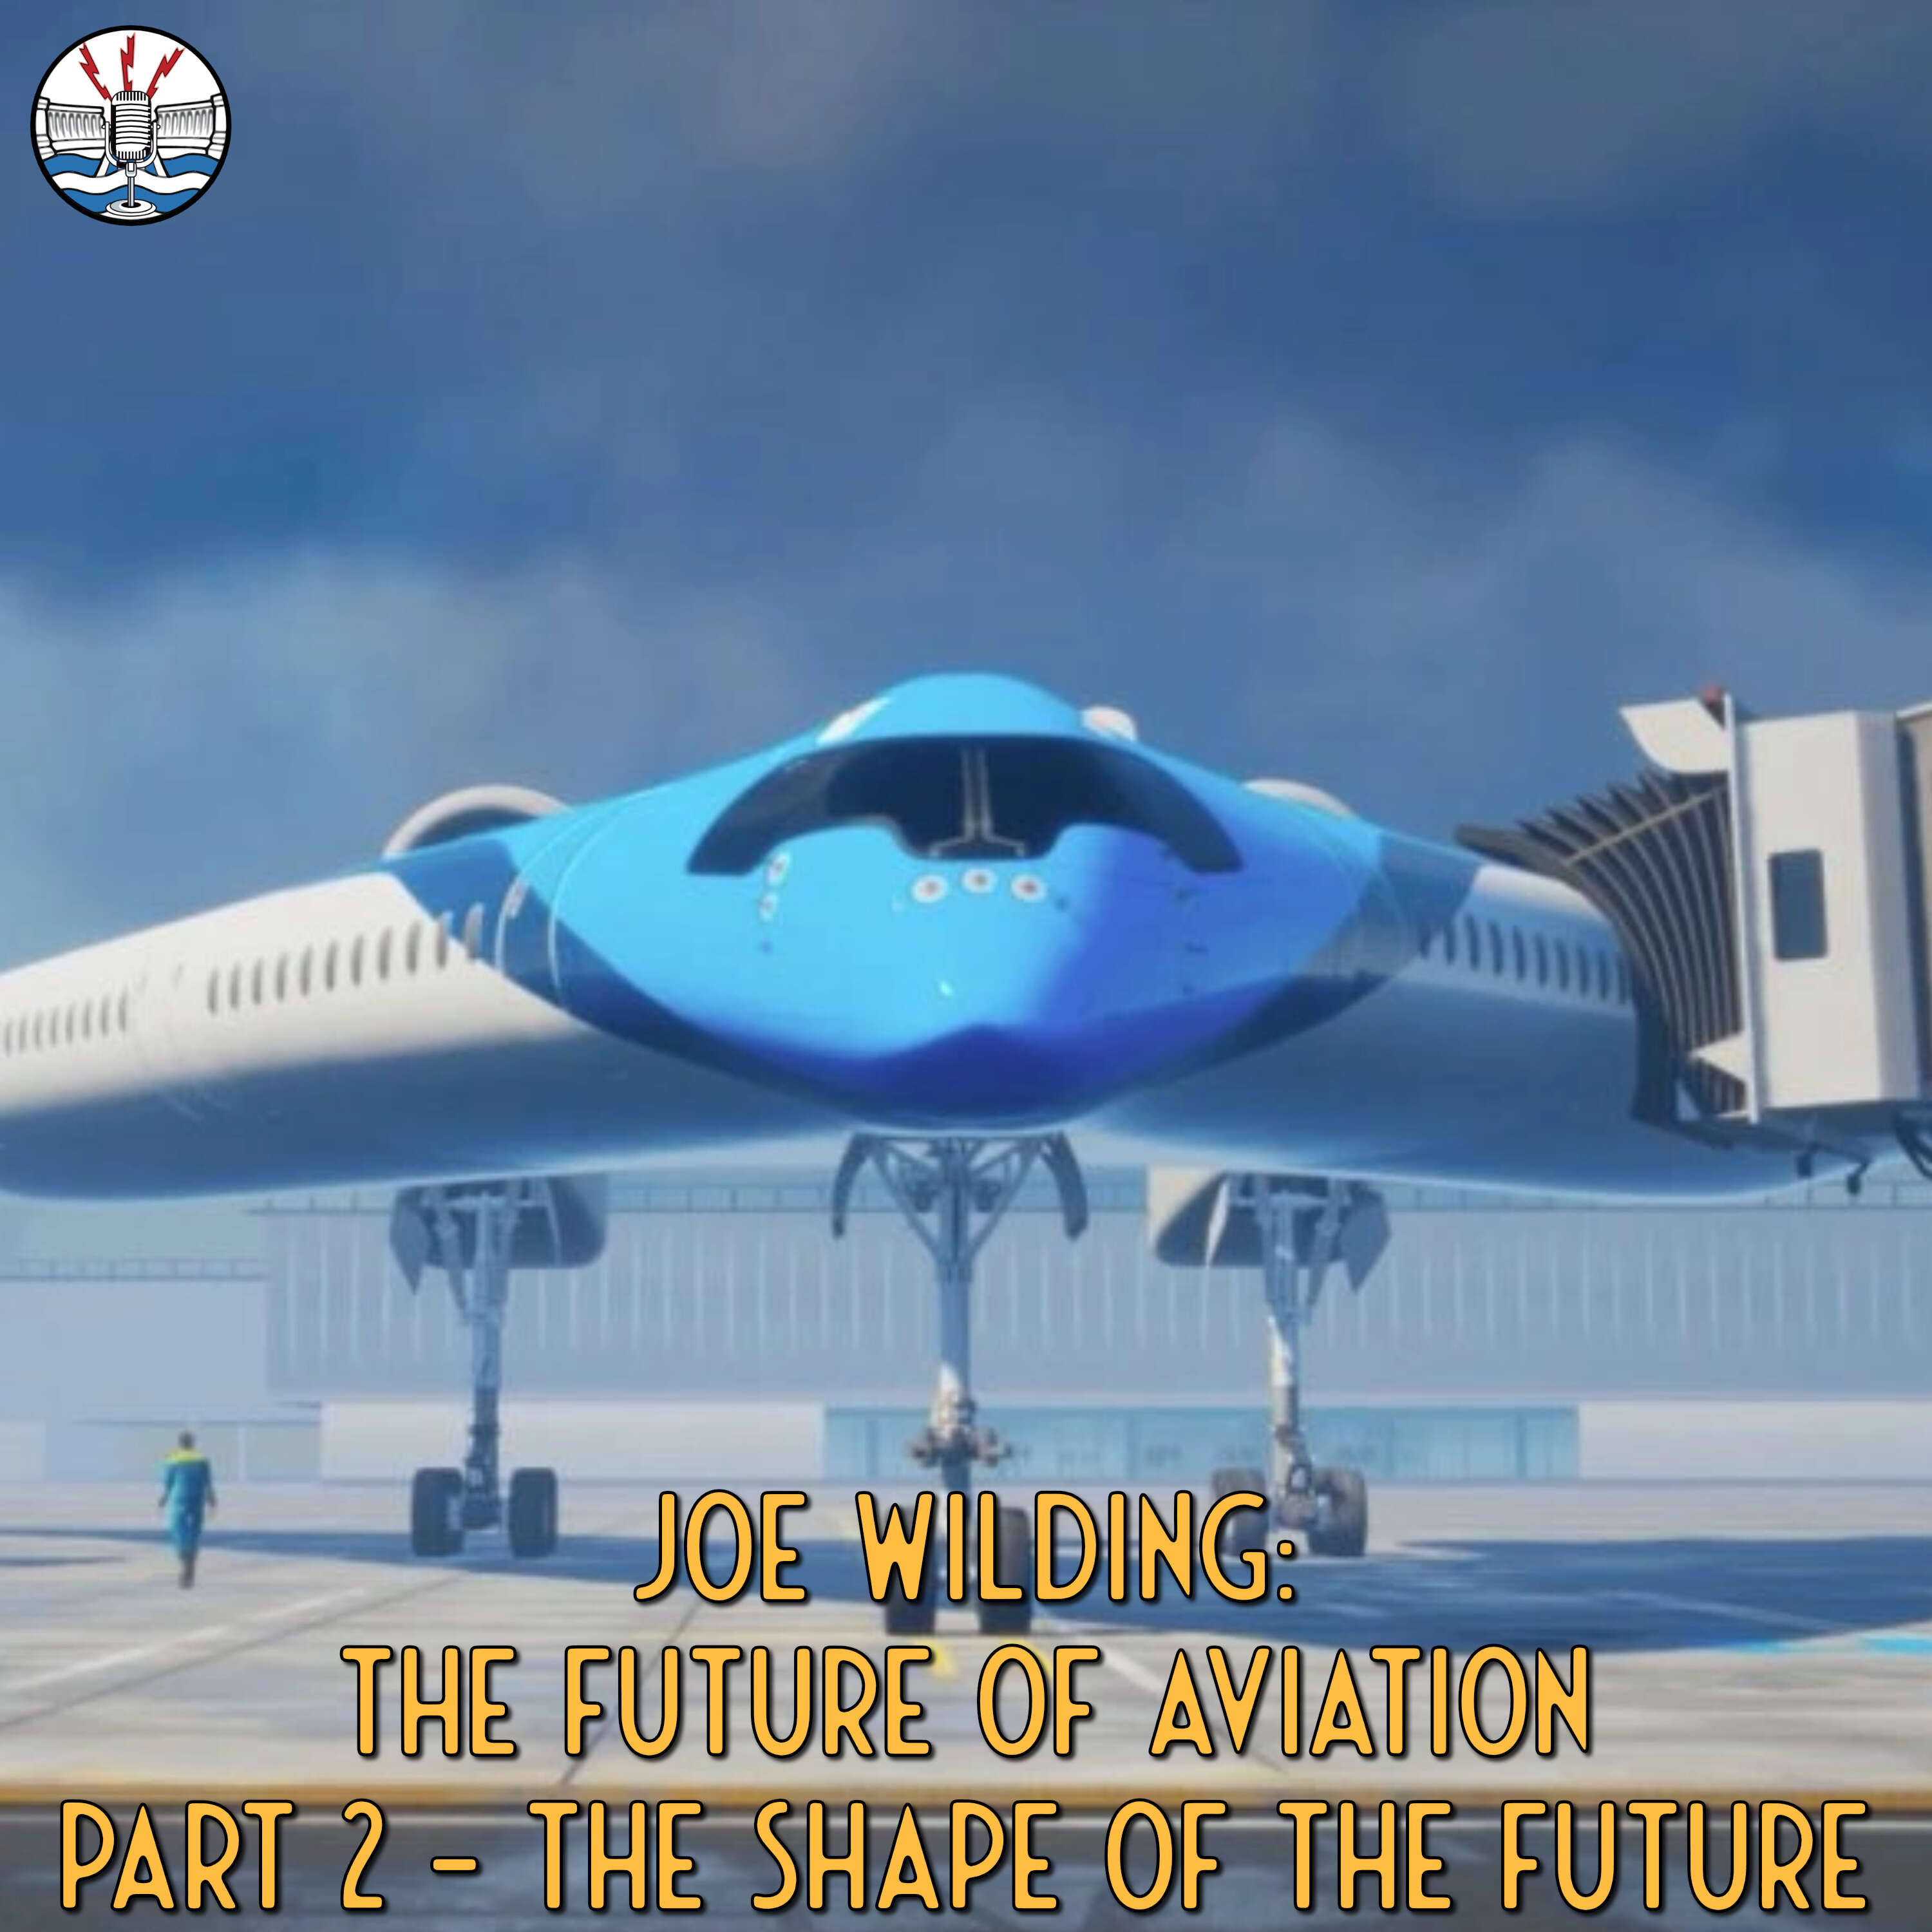 Joe Wilding: The Future of Aviation: Part 2 - The Shape of the Future